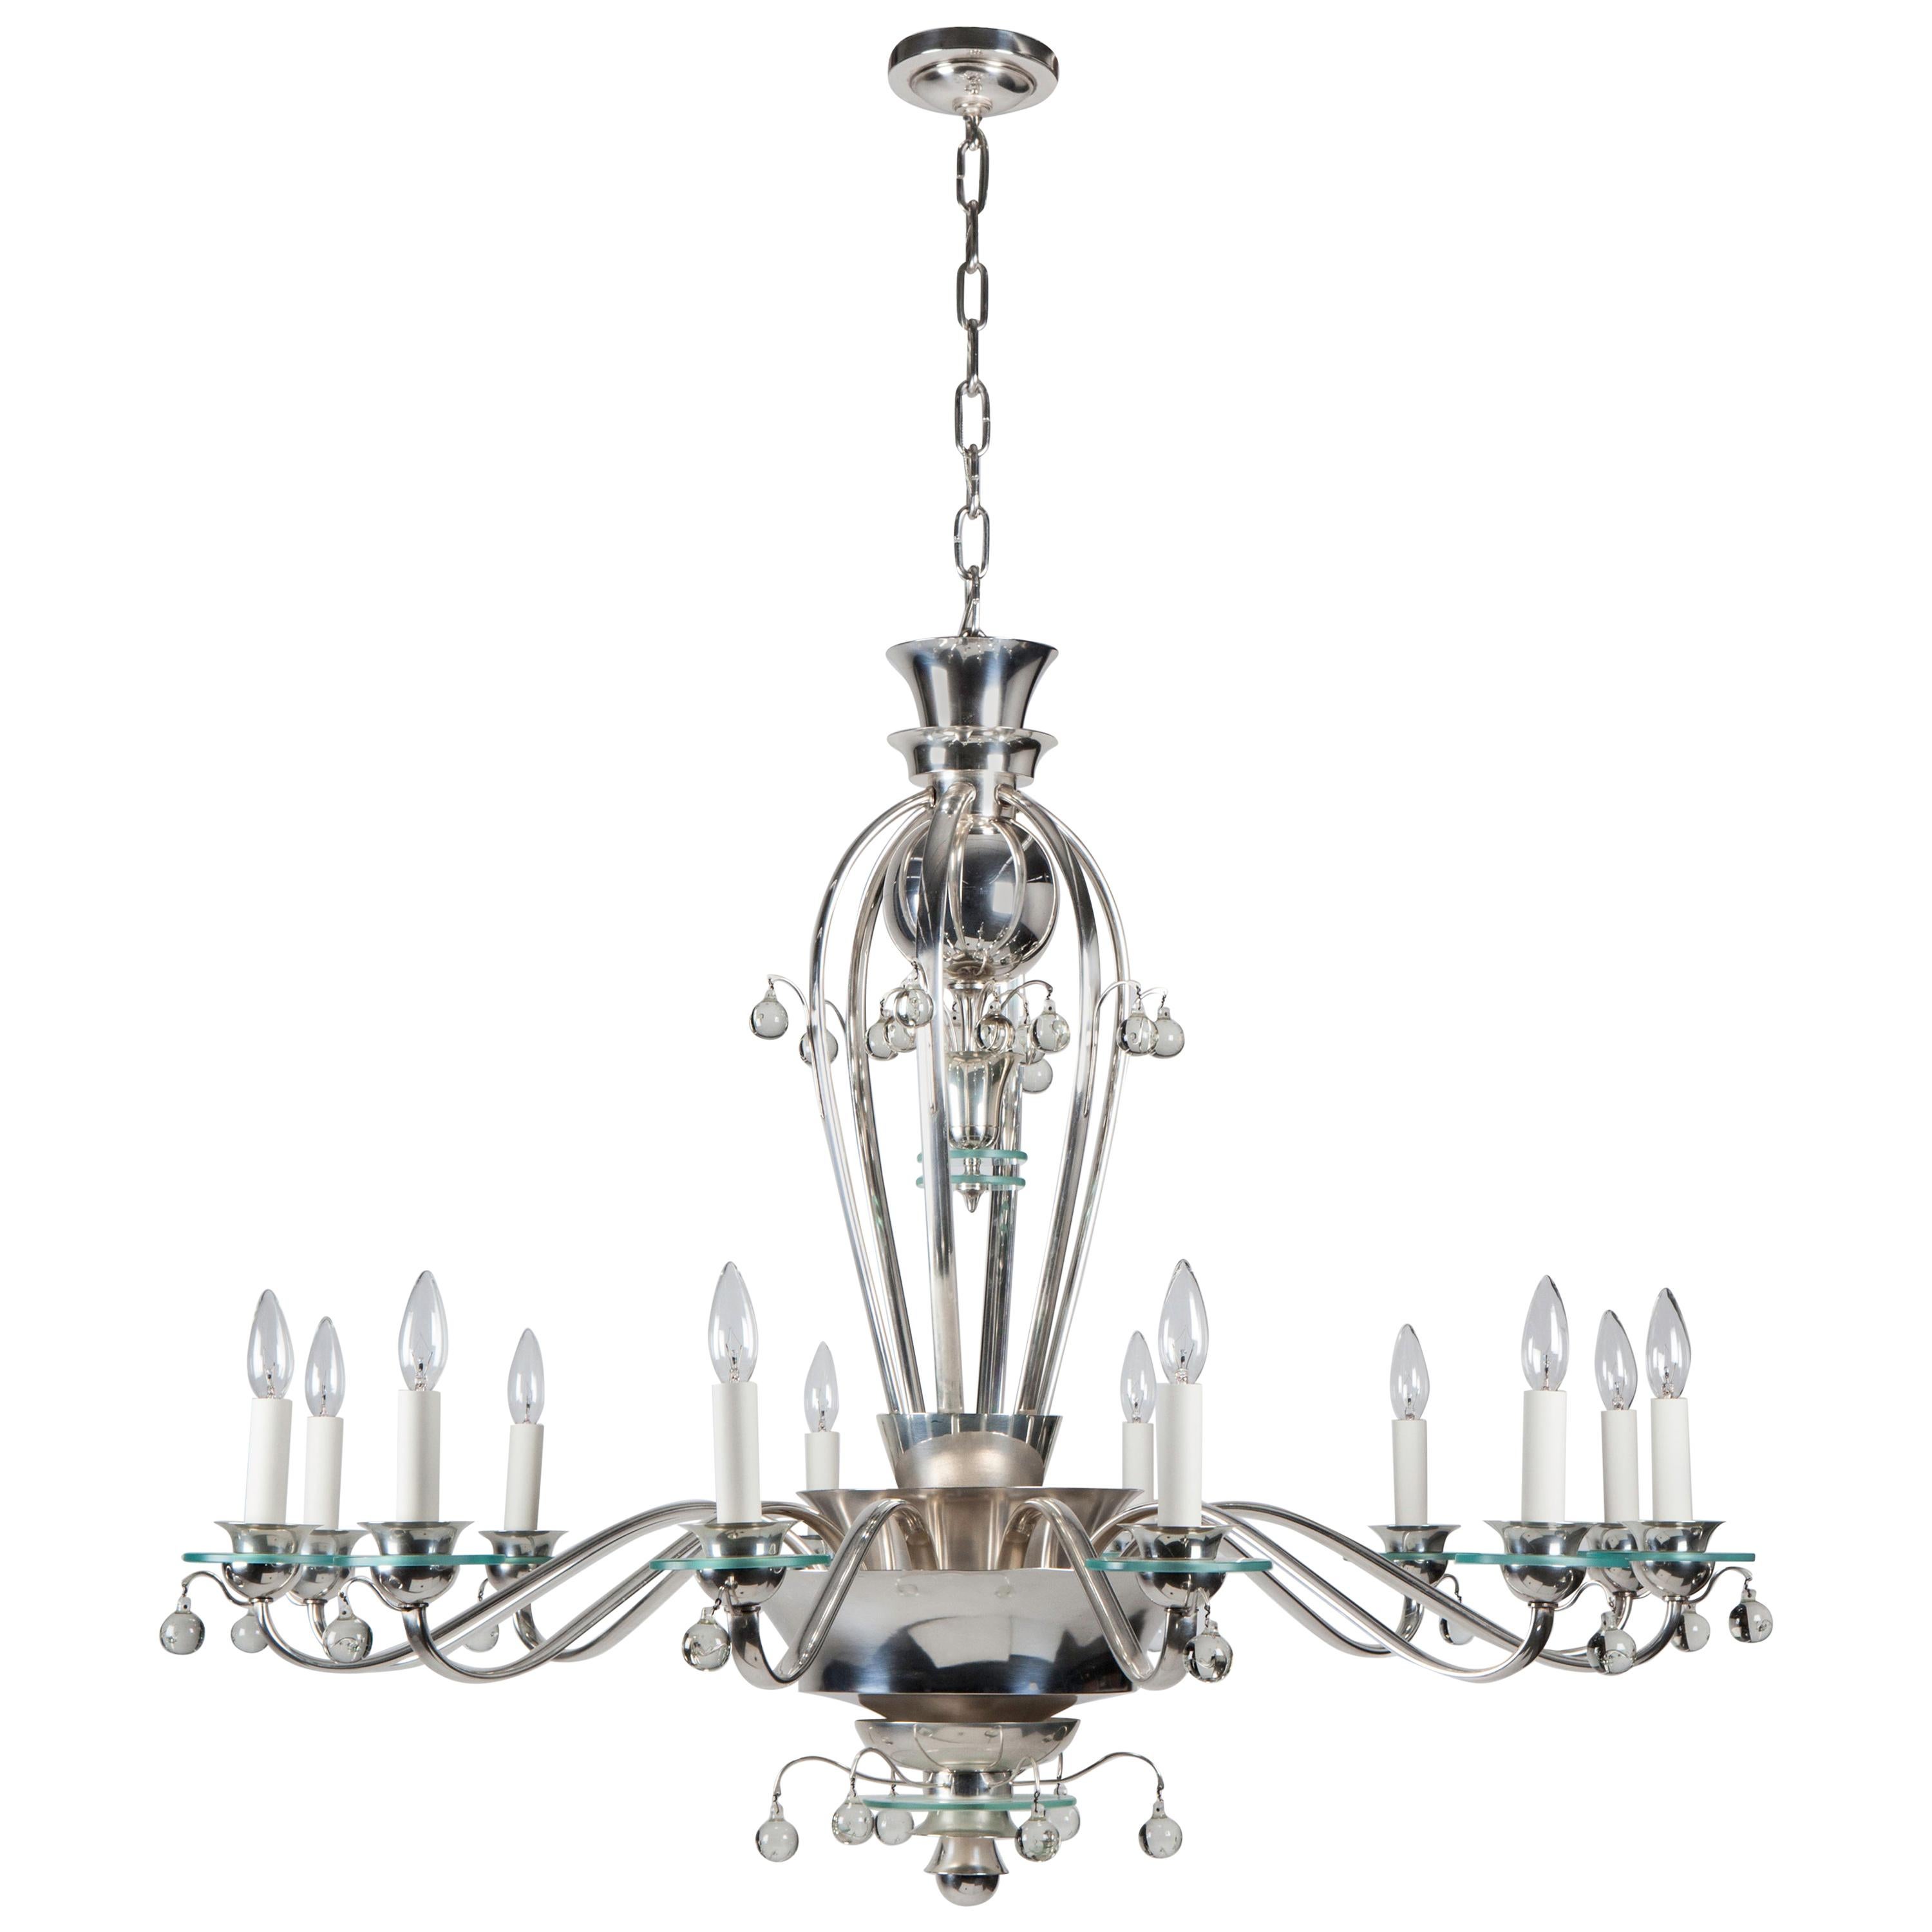 Silver Plate and Glass Art Deco Chandelier with Crystal Ball Drops, circa 1930s For Sale